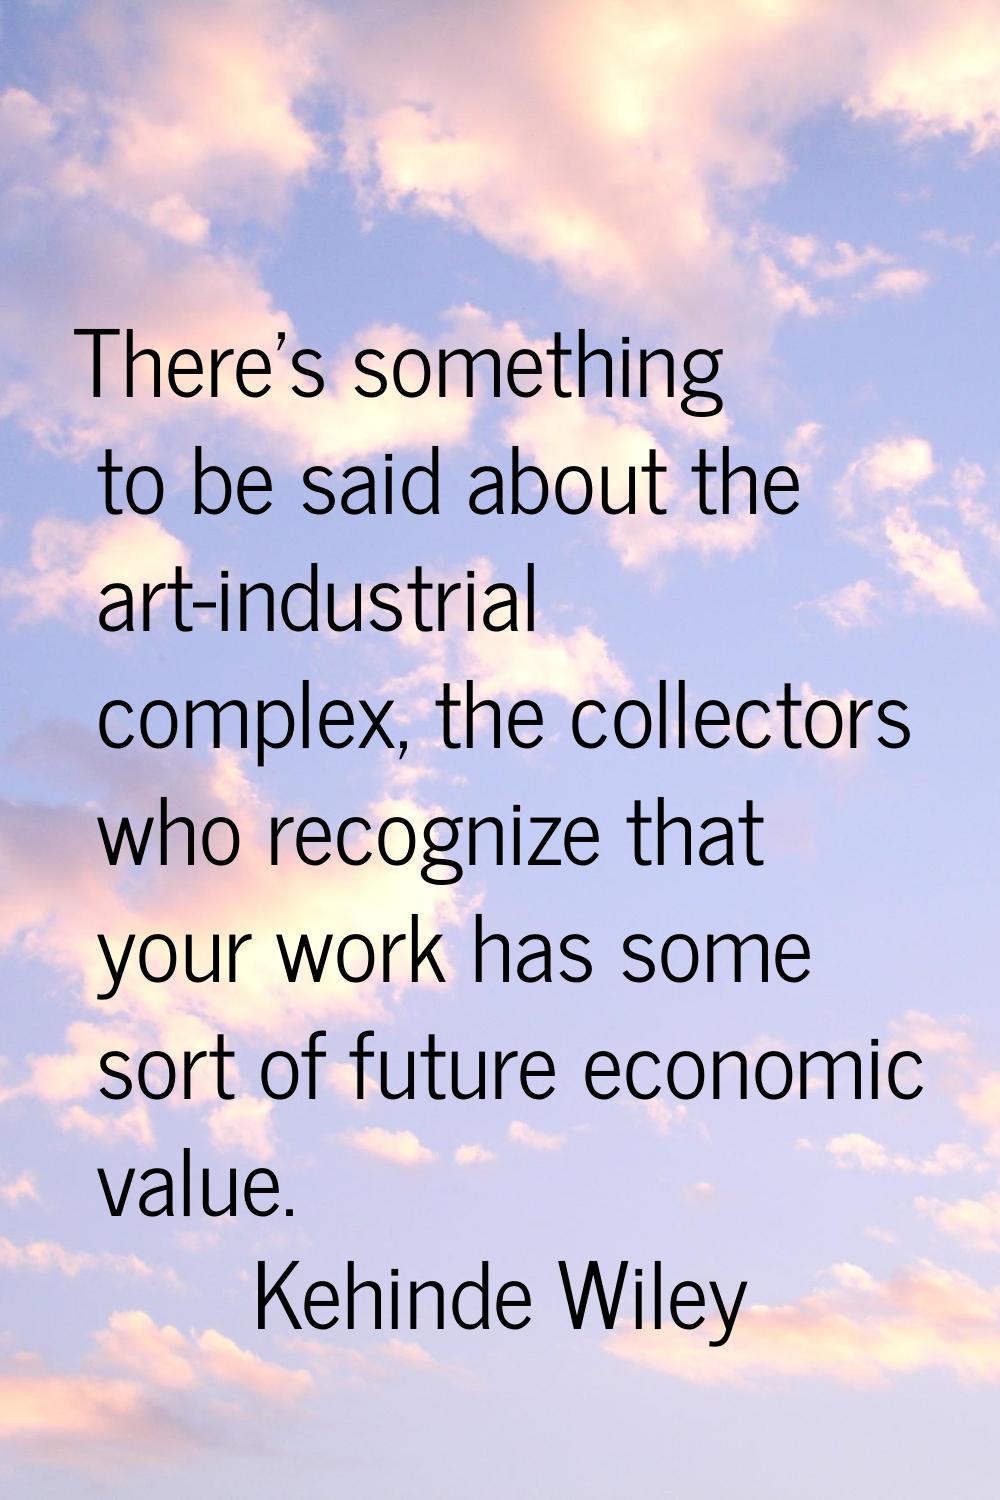 There's something to be said about the art-industrial complex, the collectors who recognize that yo